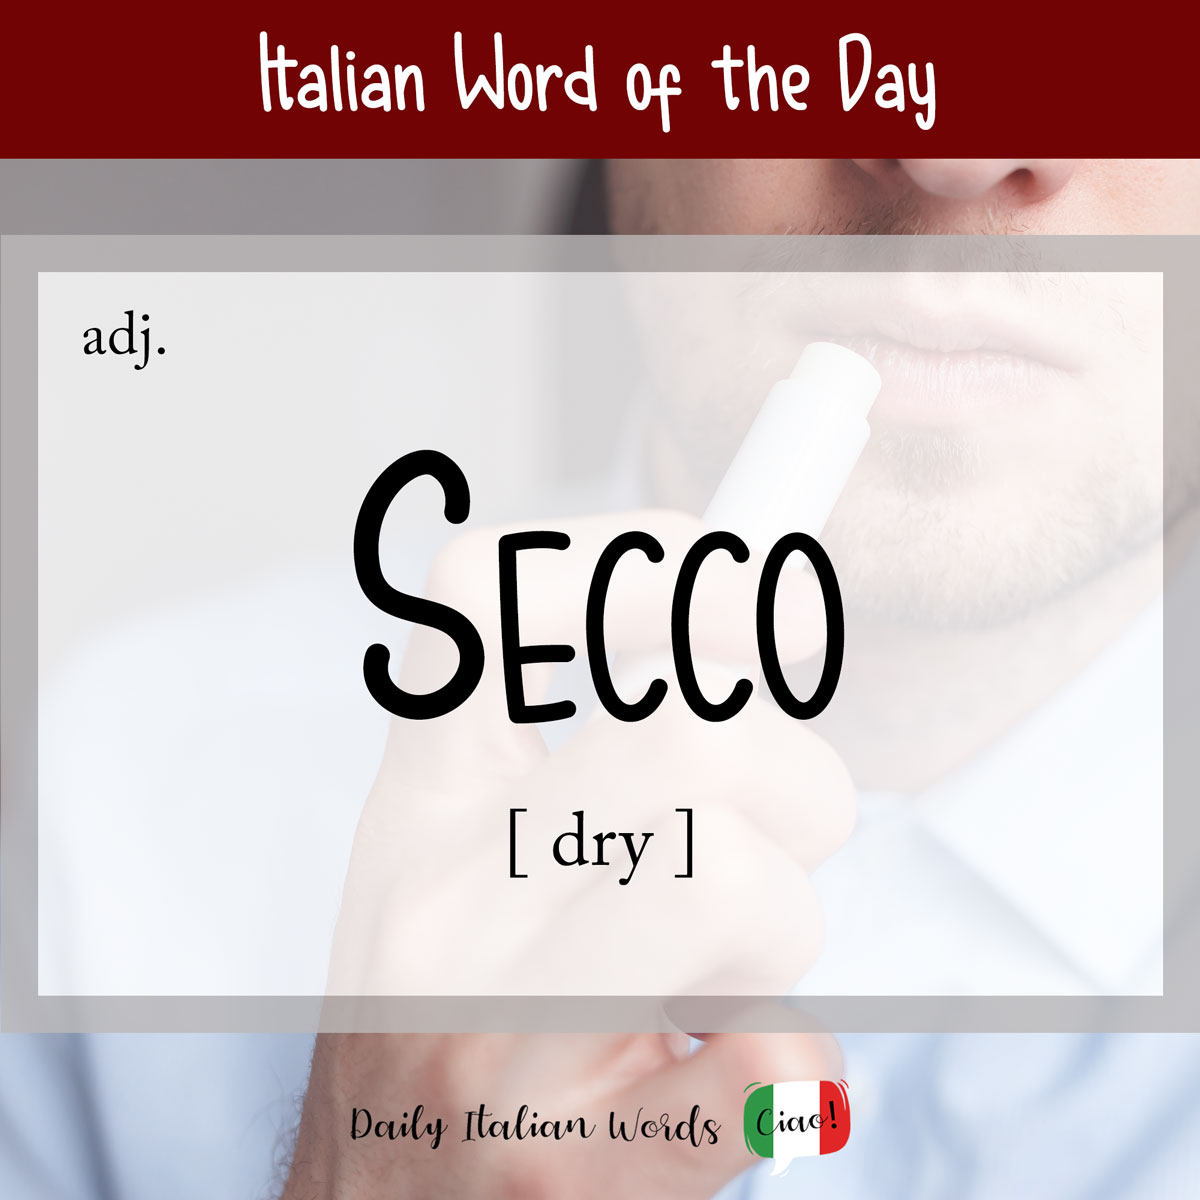 Italian word of the day: Secco (stem)